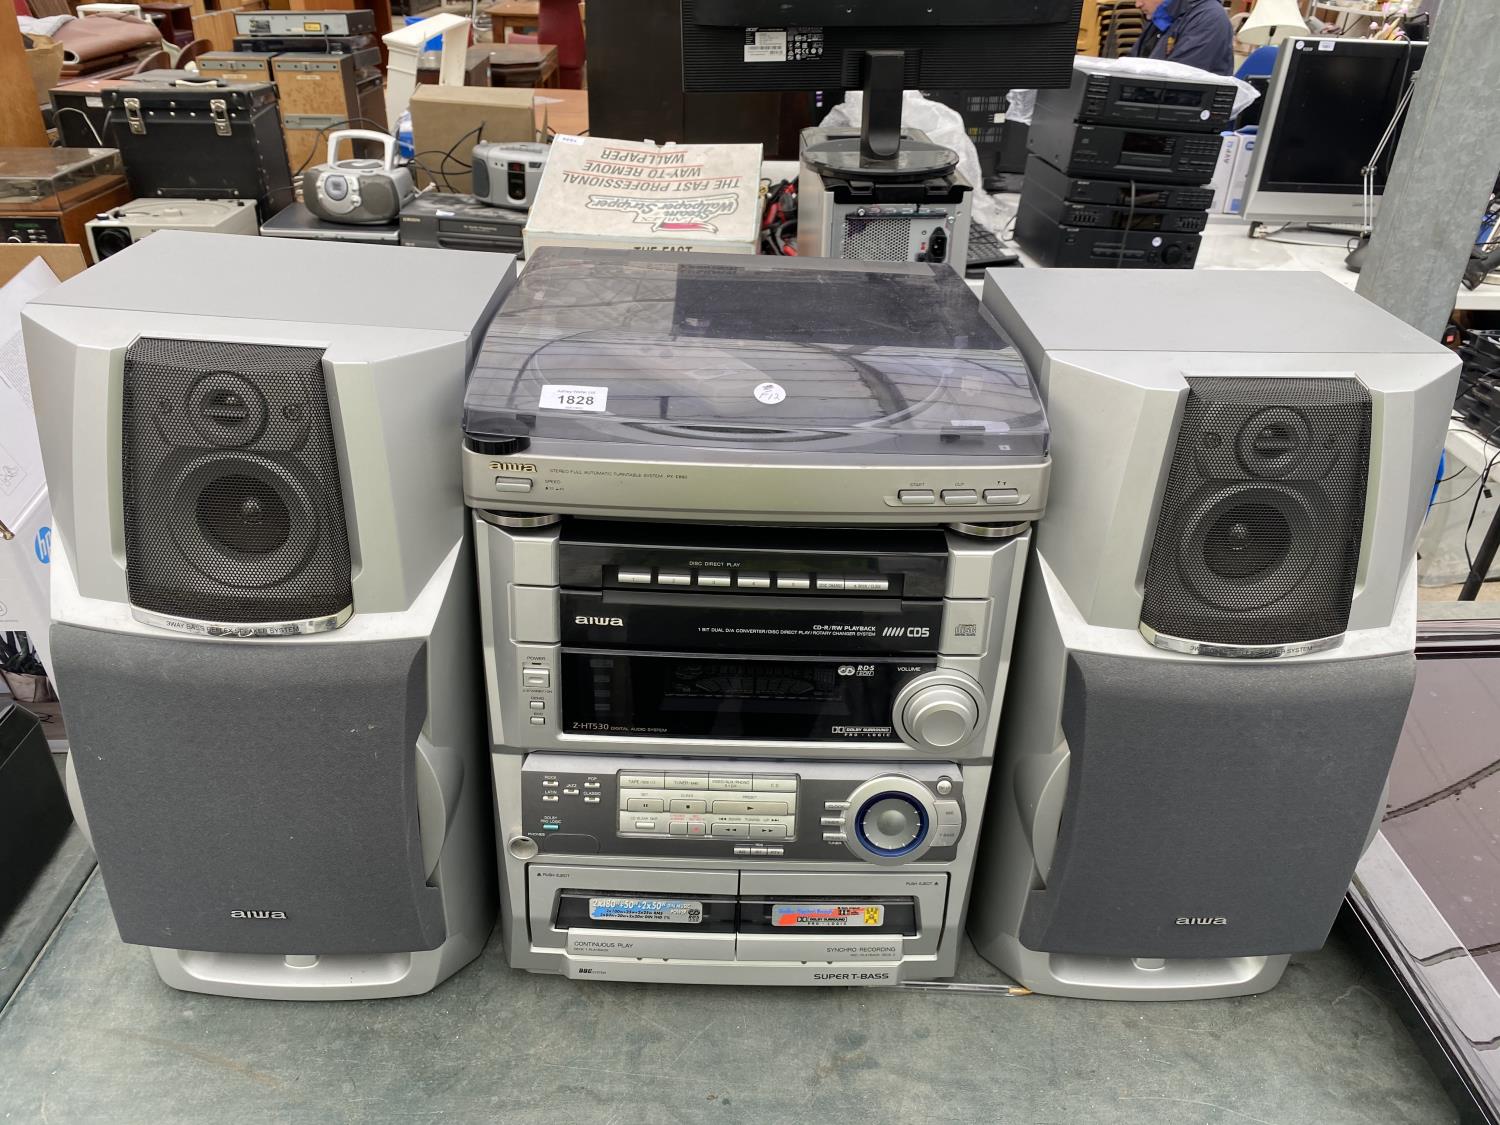 AN AIWA STEREO SYSTEM WITH TWO SPEAKERS IN W/O BUT NO WARRENTY